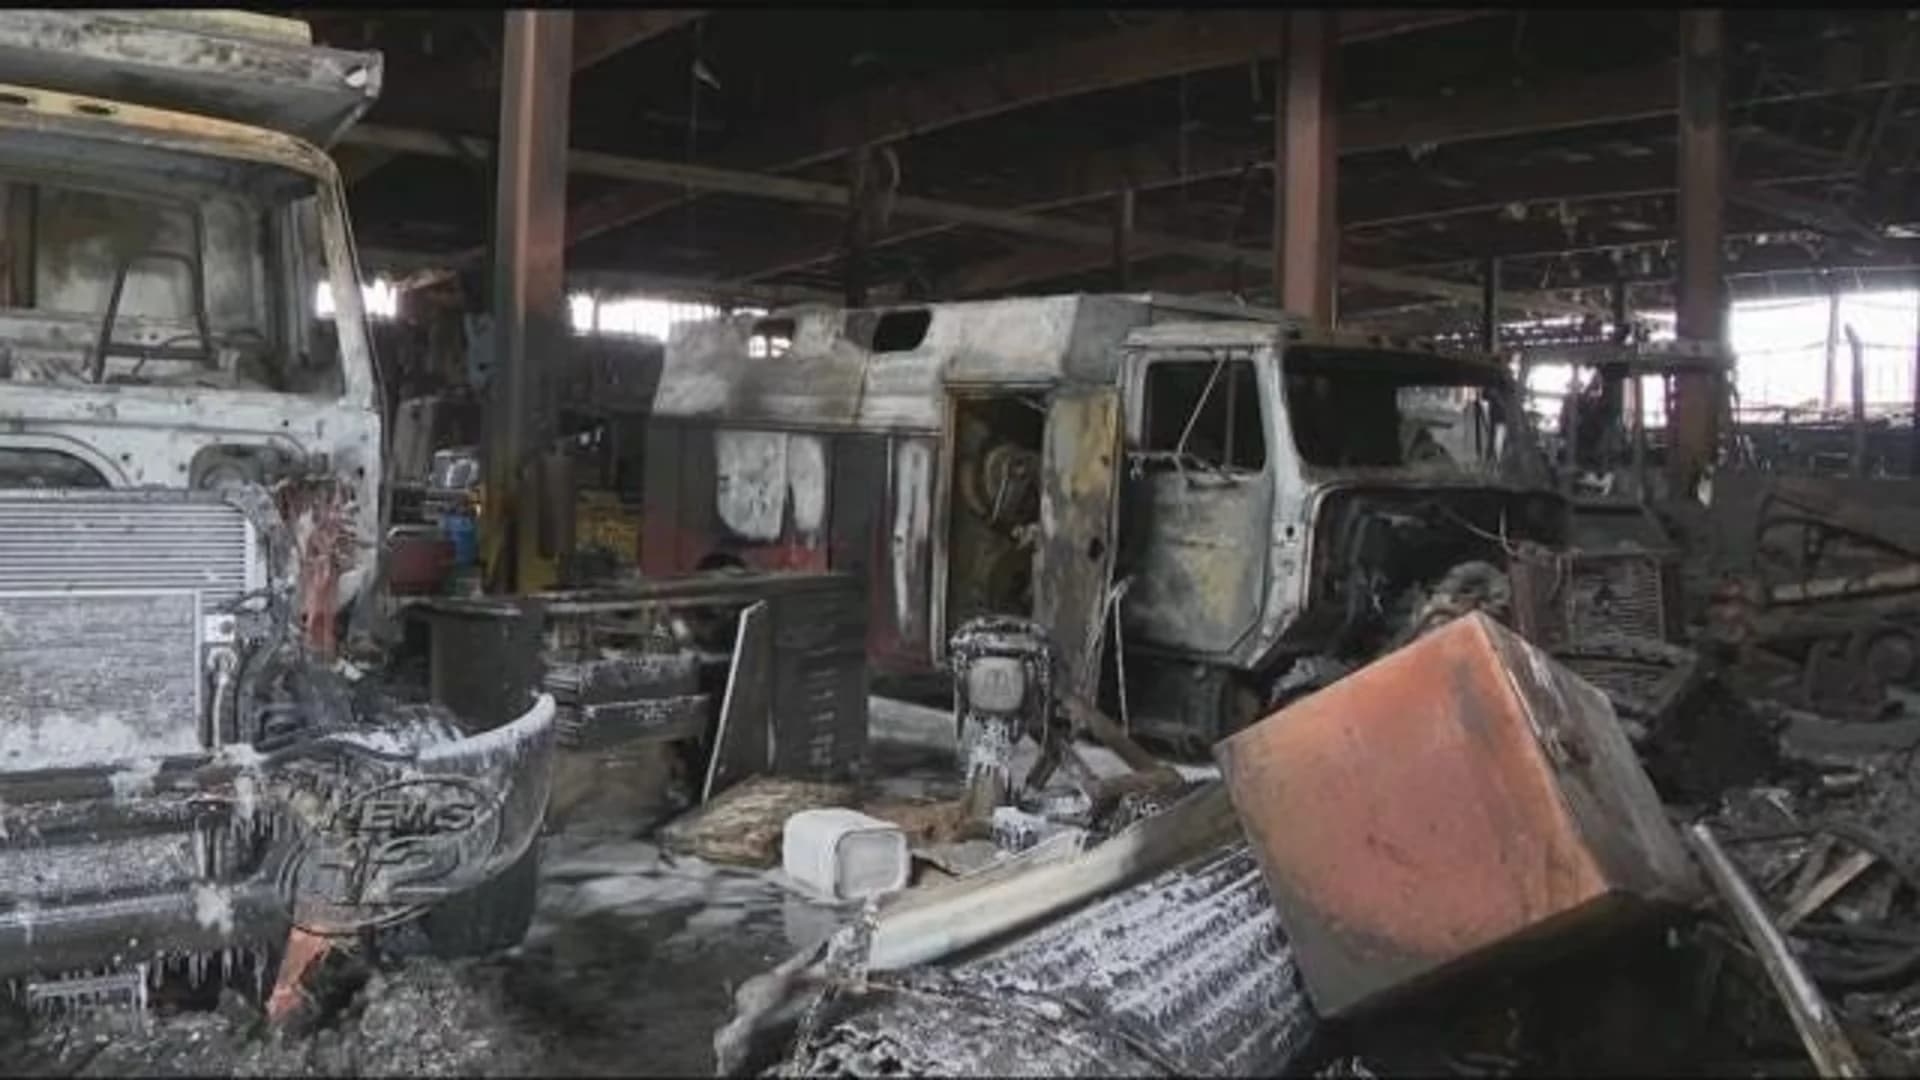 Commercial building fire destroys heavy machinery, boats in Poughkeepsie